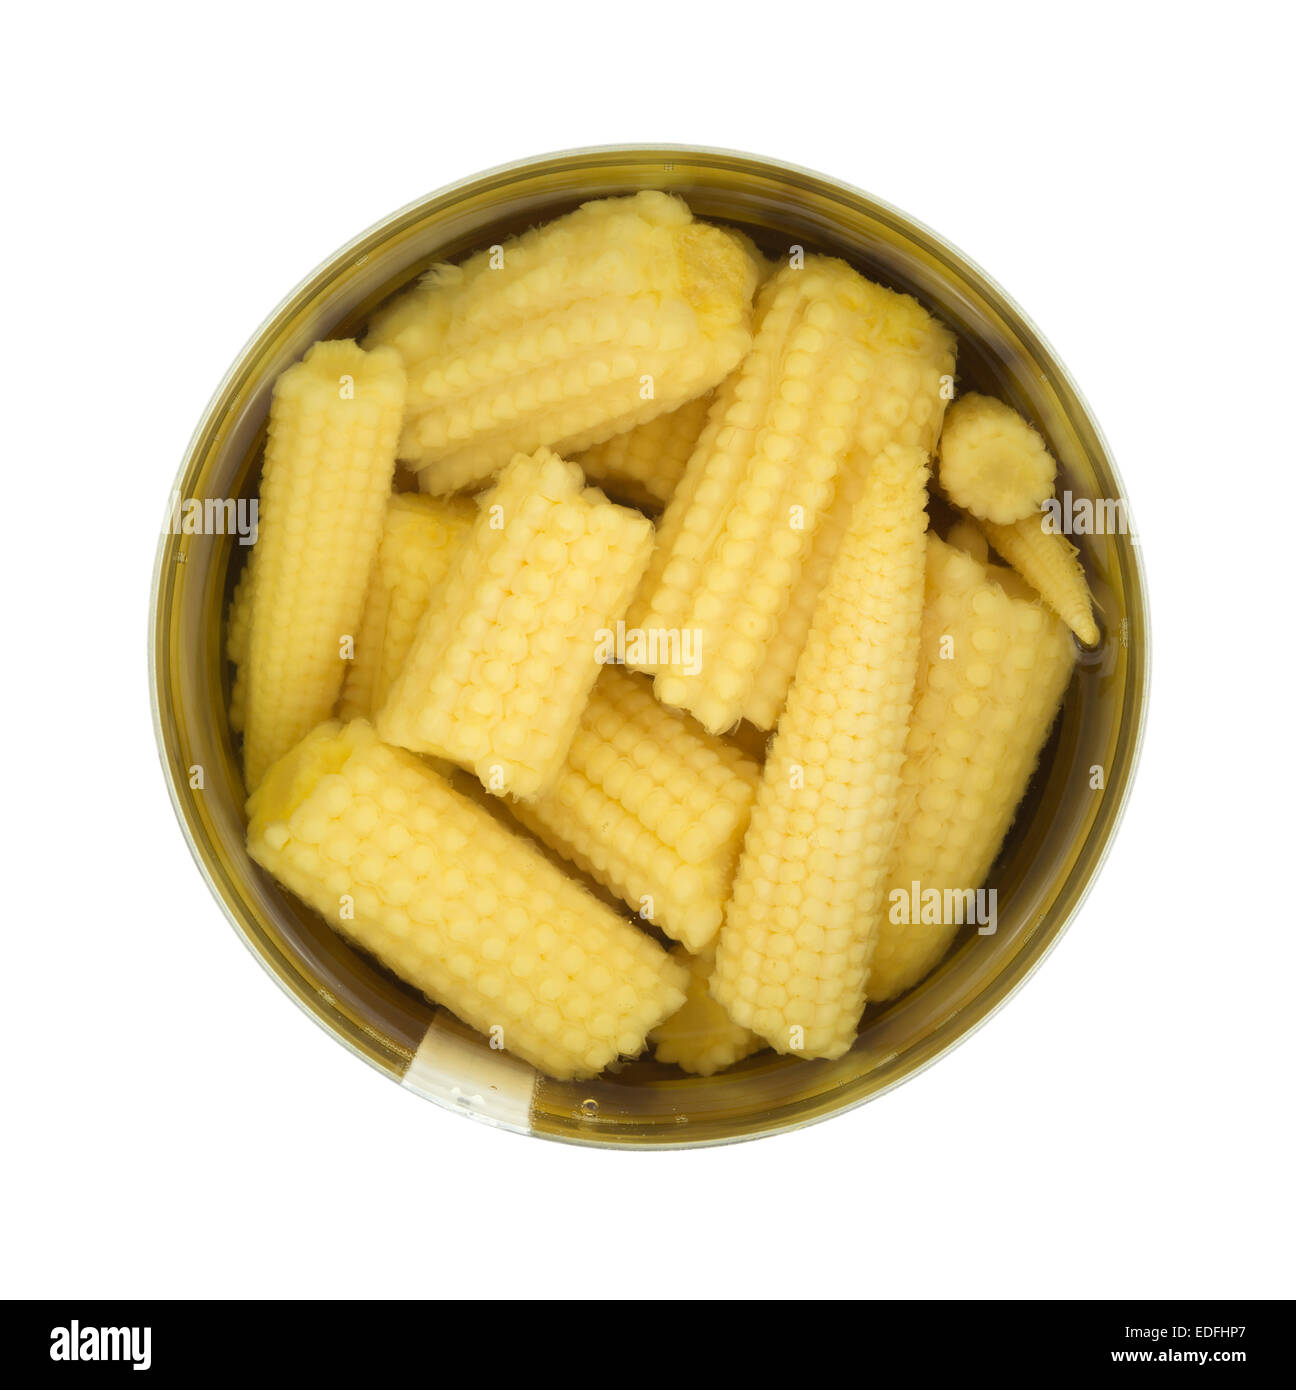 Top view of small baby corn nuggets in an opened can atop a white background. Stock Photo